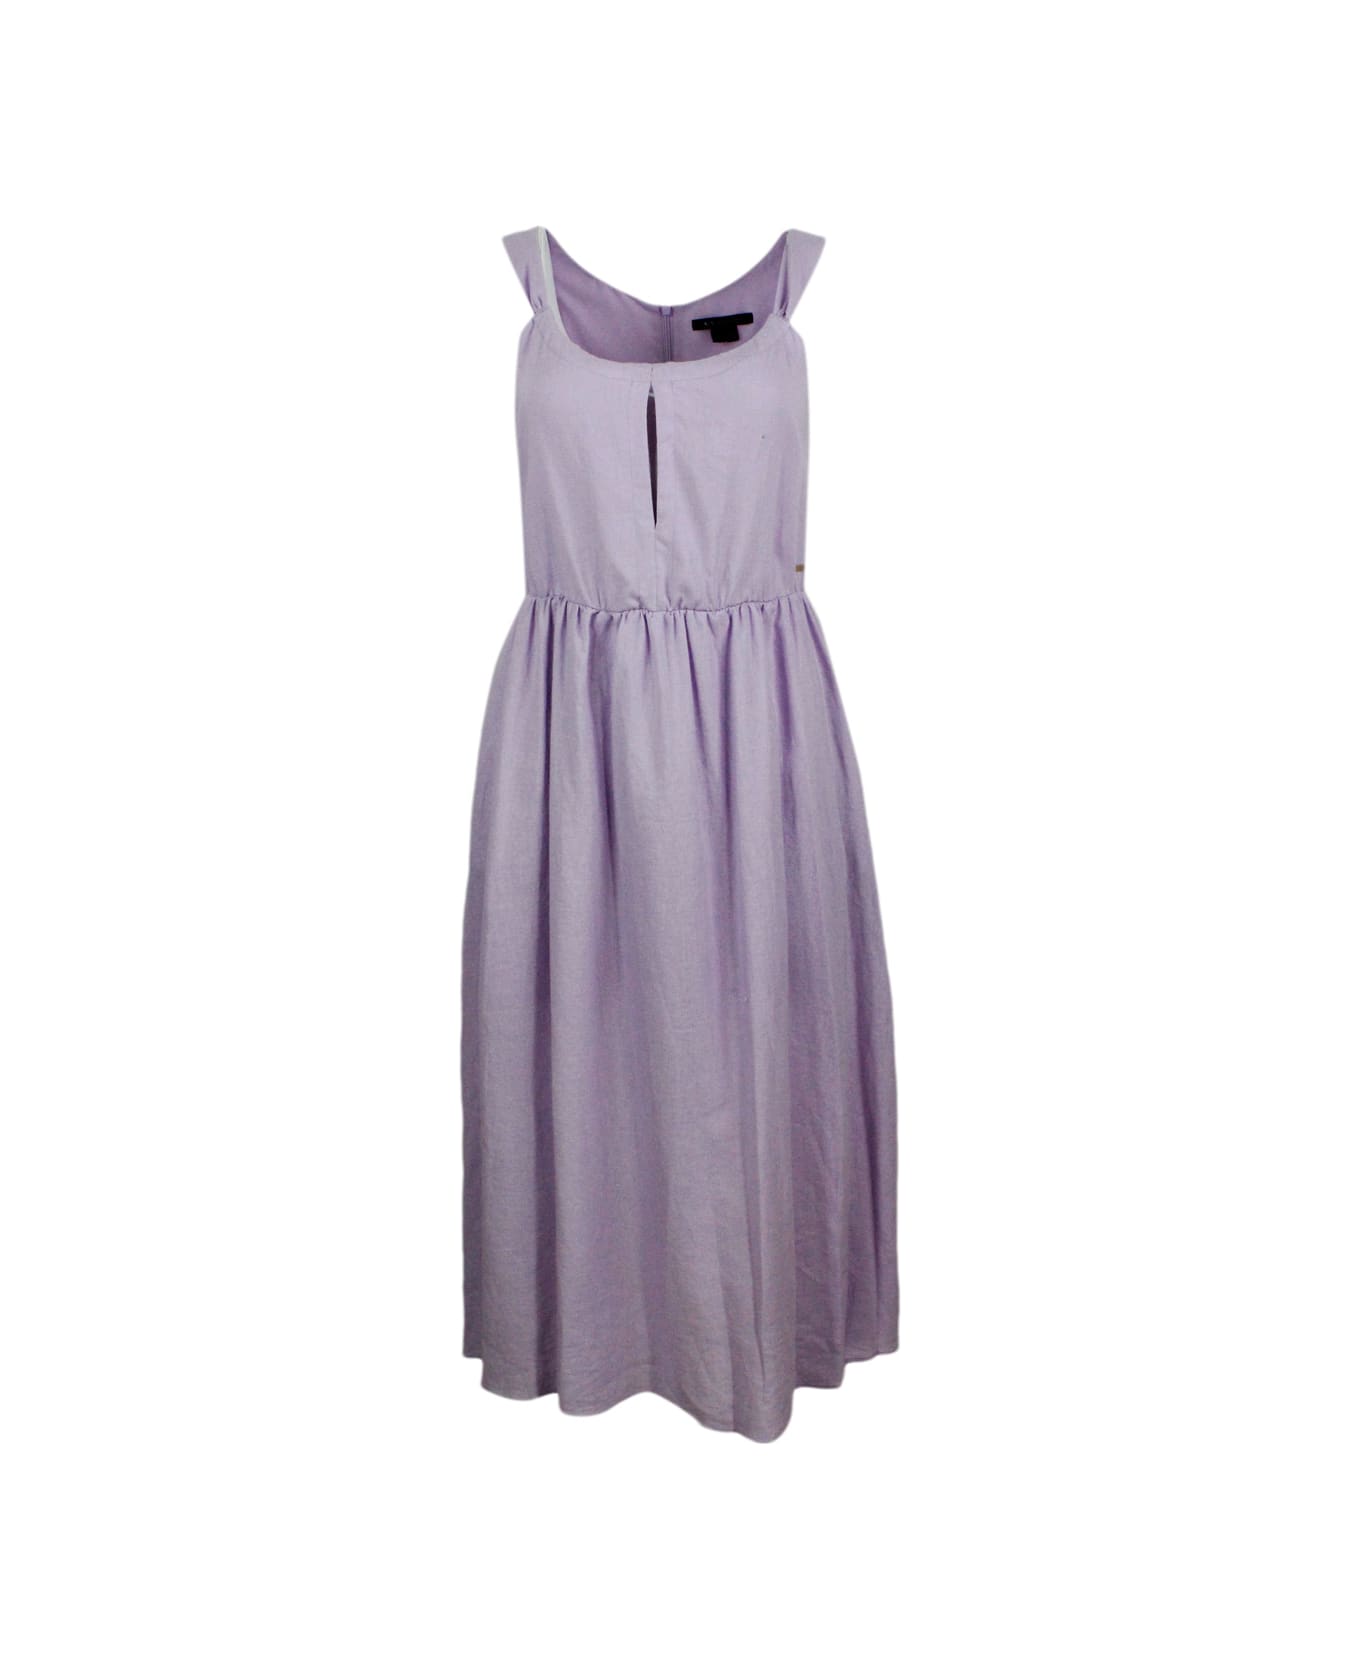 Armani Collezioni Sleeveless Dress Made Of Linen Blend With Elastic Gathering At The Waist. Welt Pockets - Pink